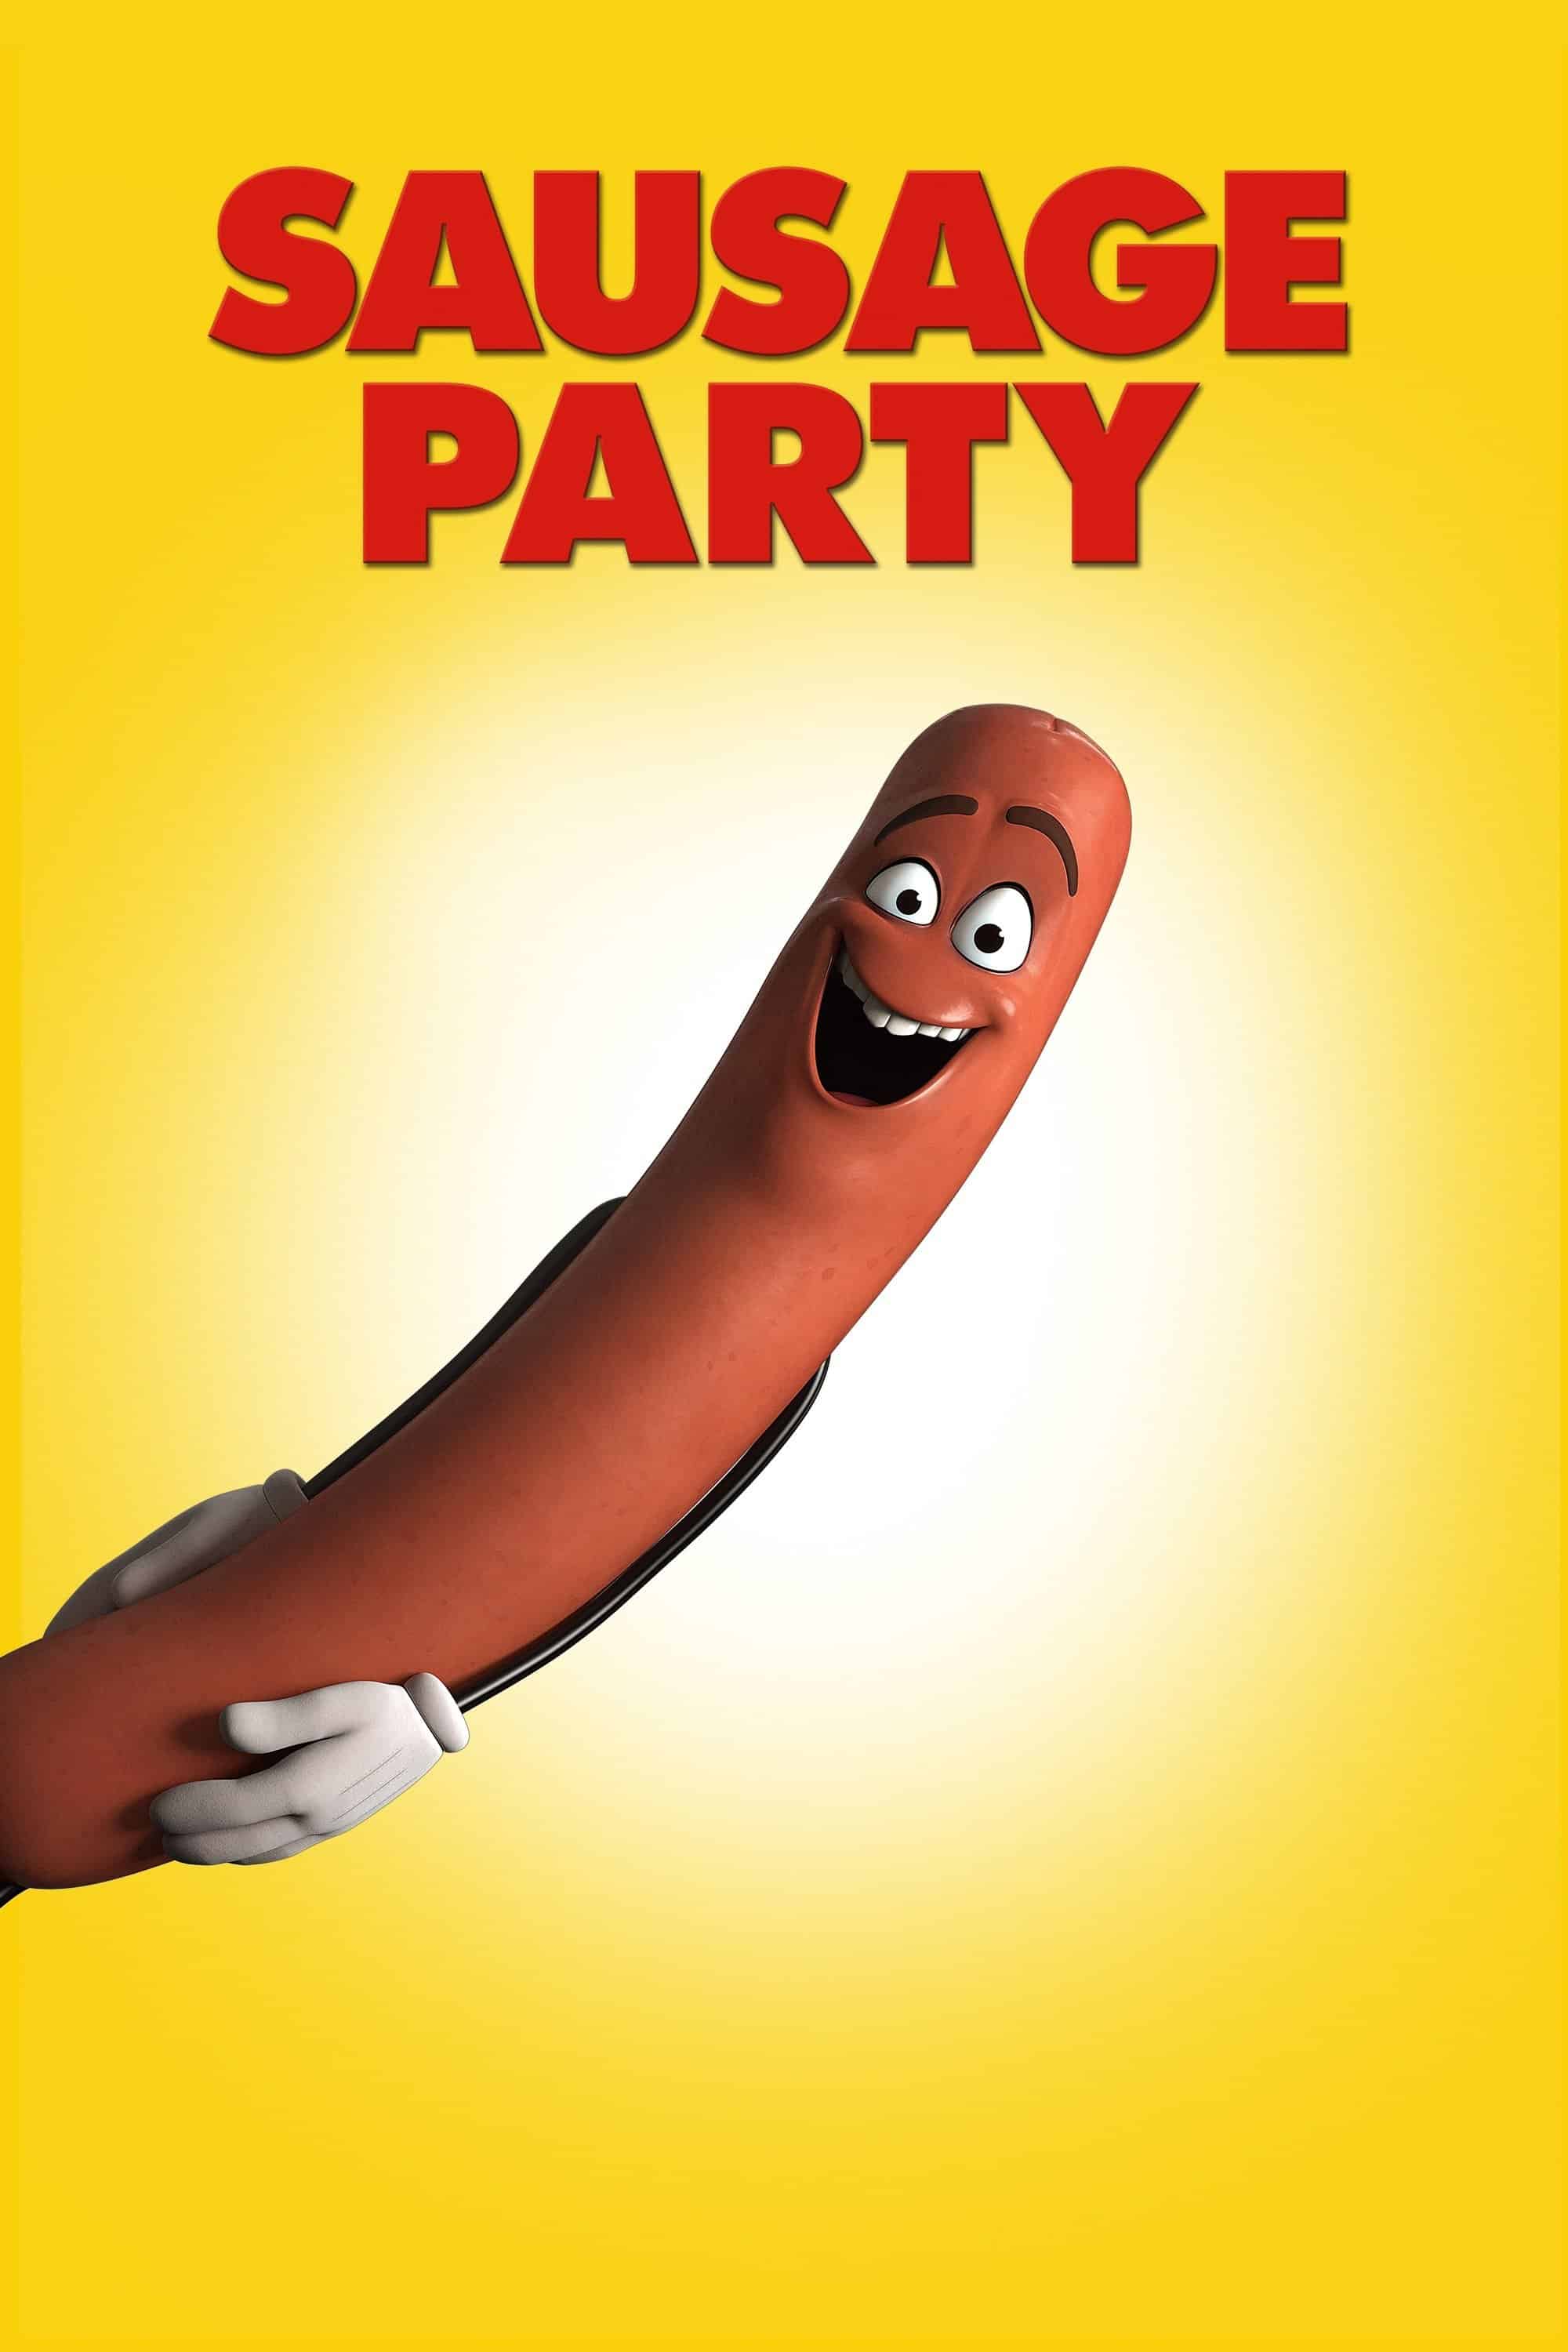 Sausage Party, 2016 